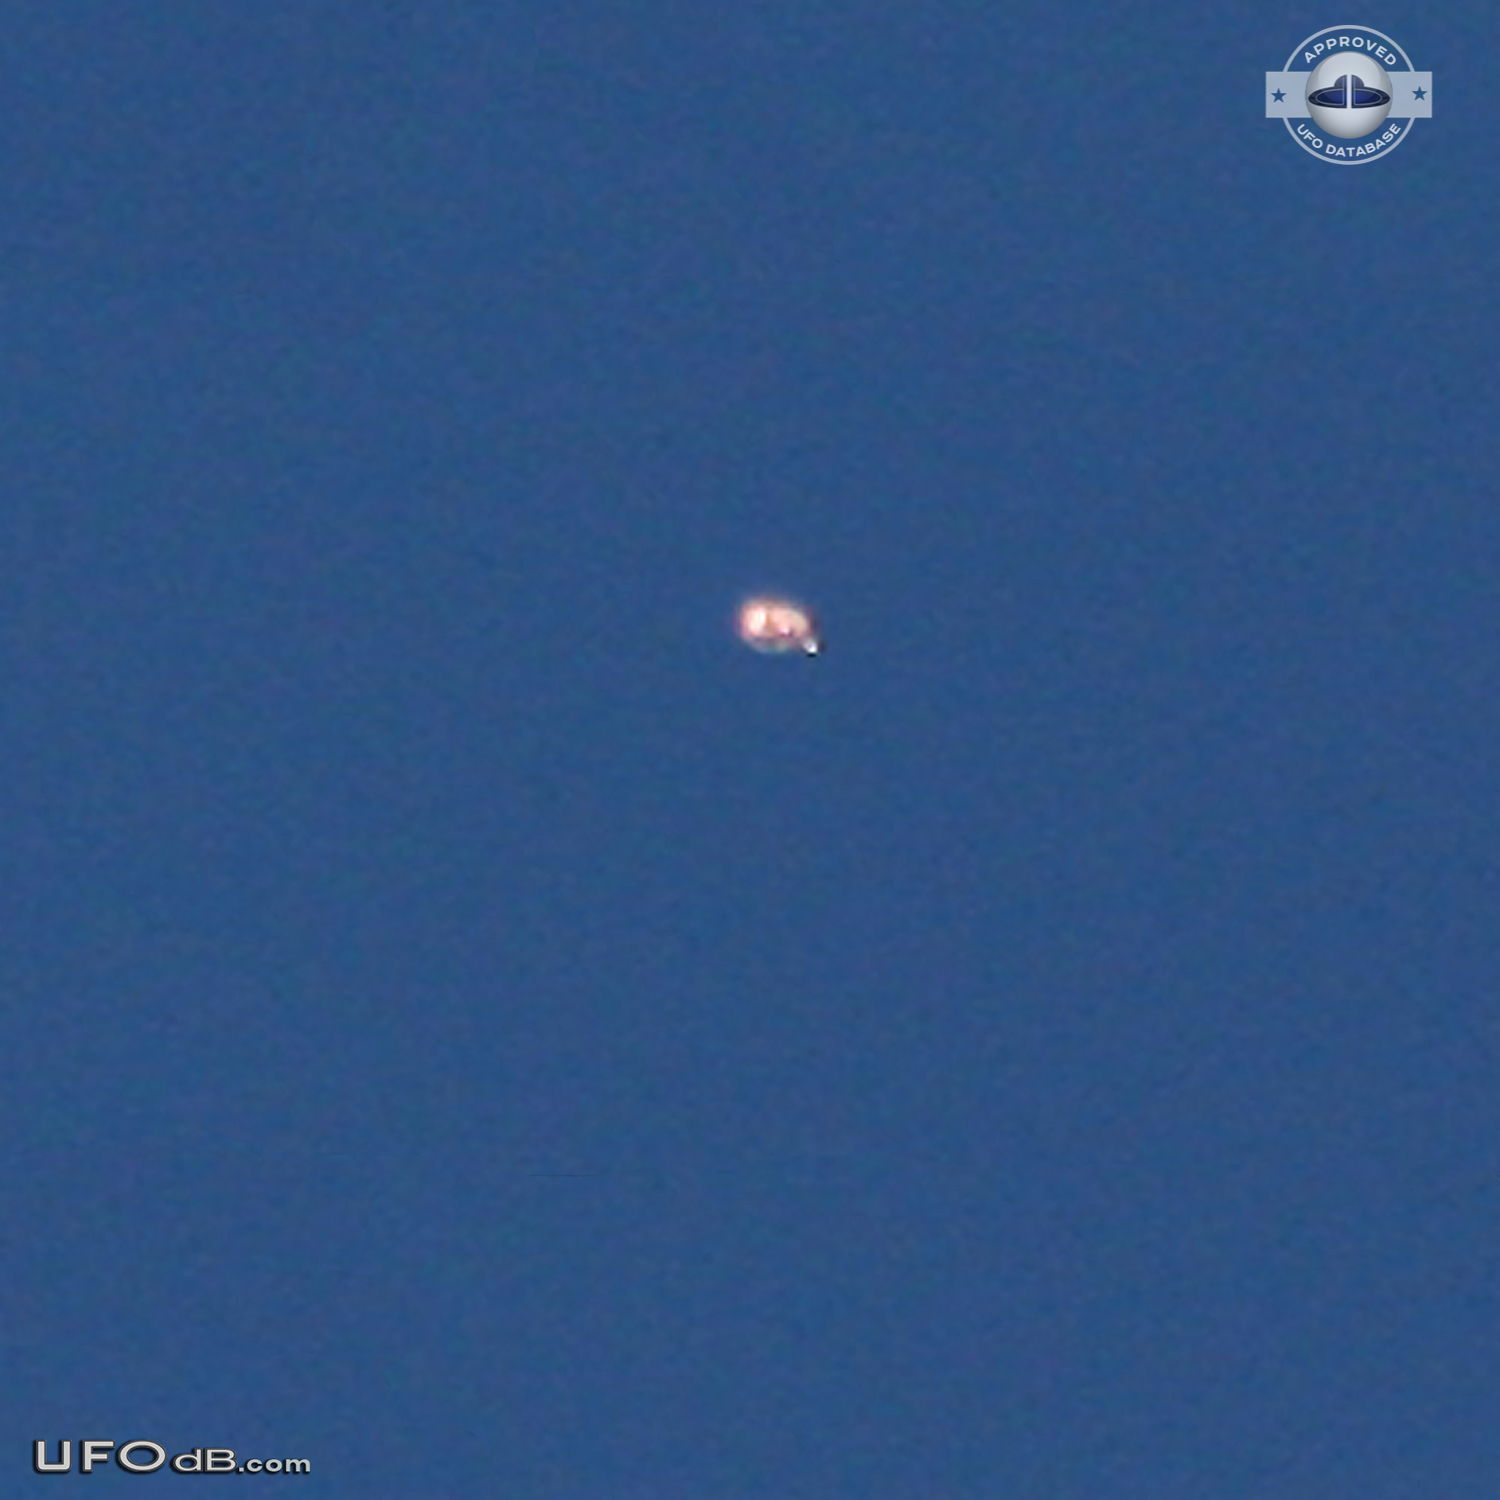 Very bright reflective UFO - Thousands Oaks California - pictures 2012 UFO Picture #516-1